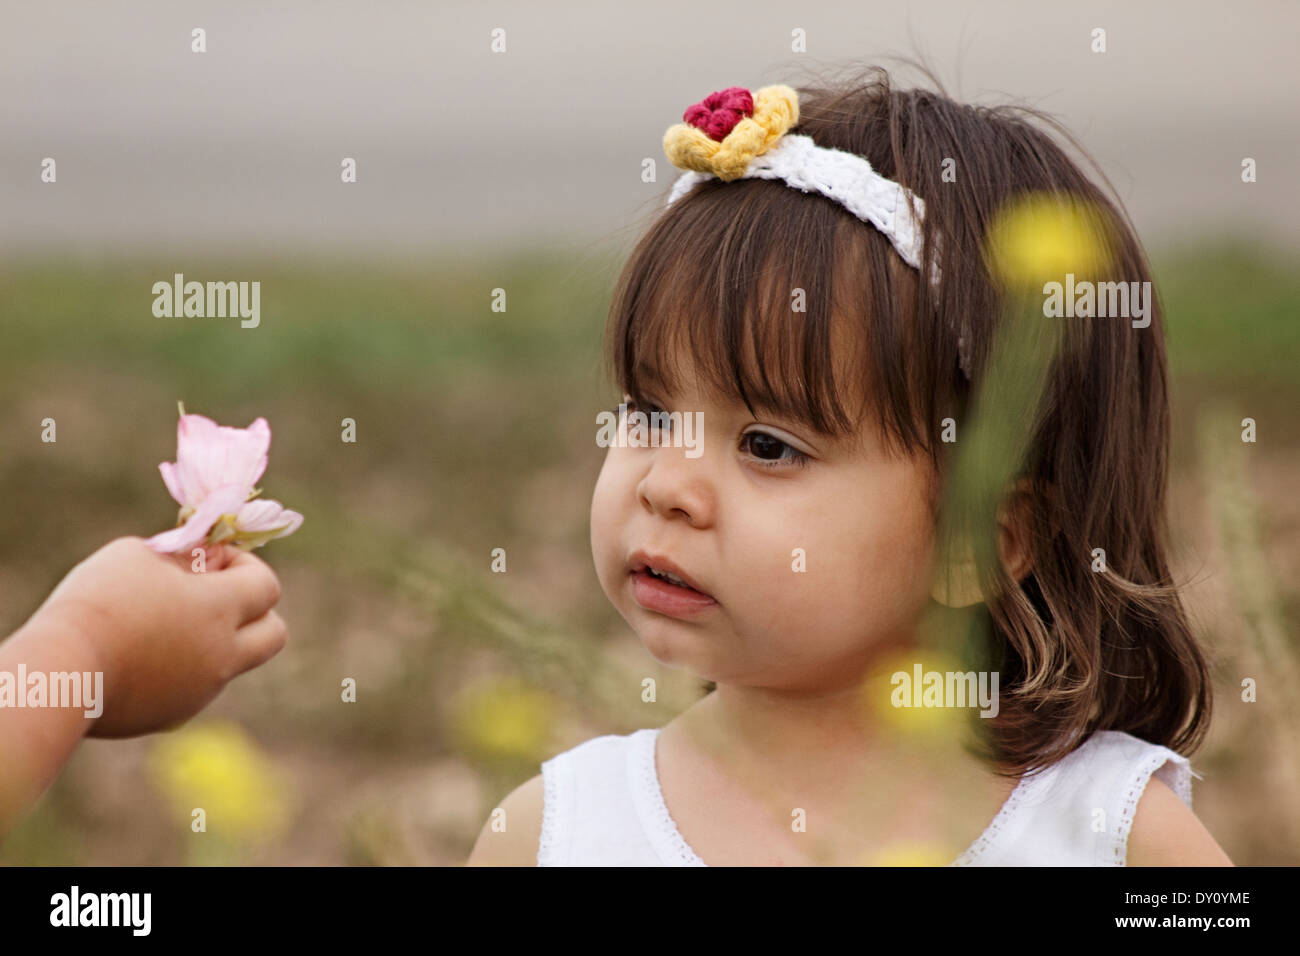 My youngest daughter being handed a wildflower from her sister. Stock Photo